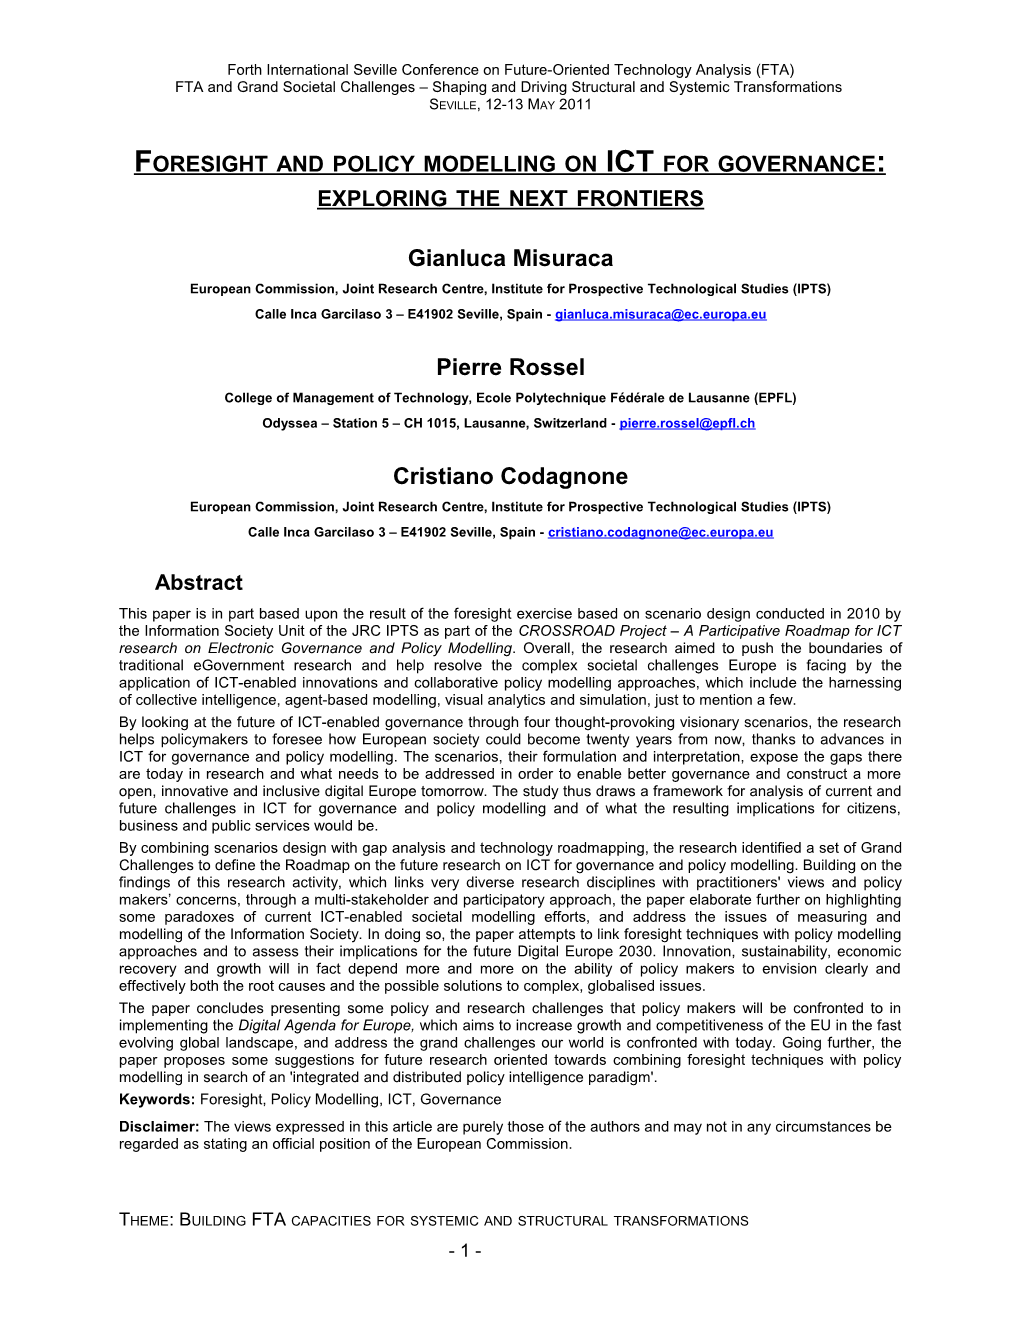 Foresight and Policy Modelling on Ict for Governance: Exploring the Next Frontiers